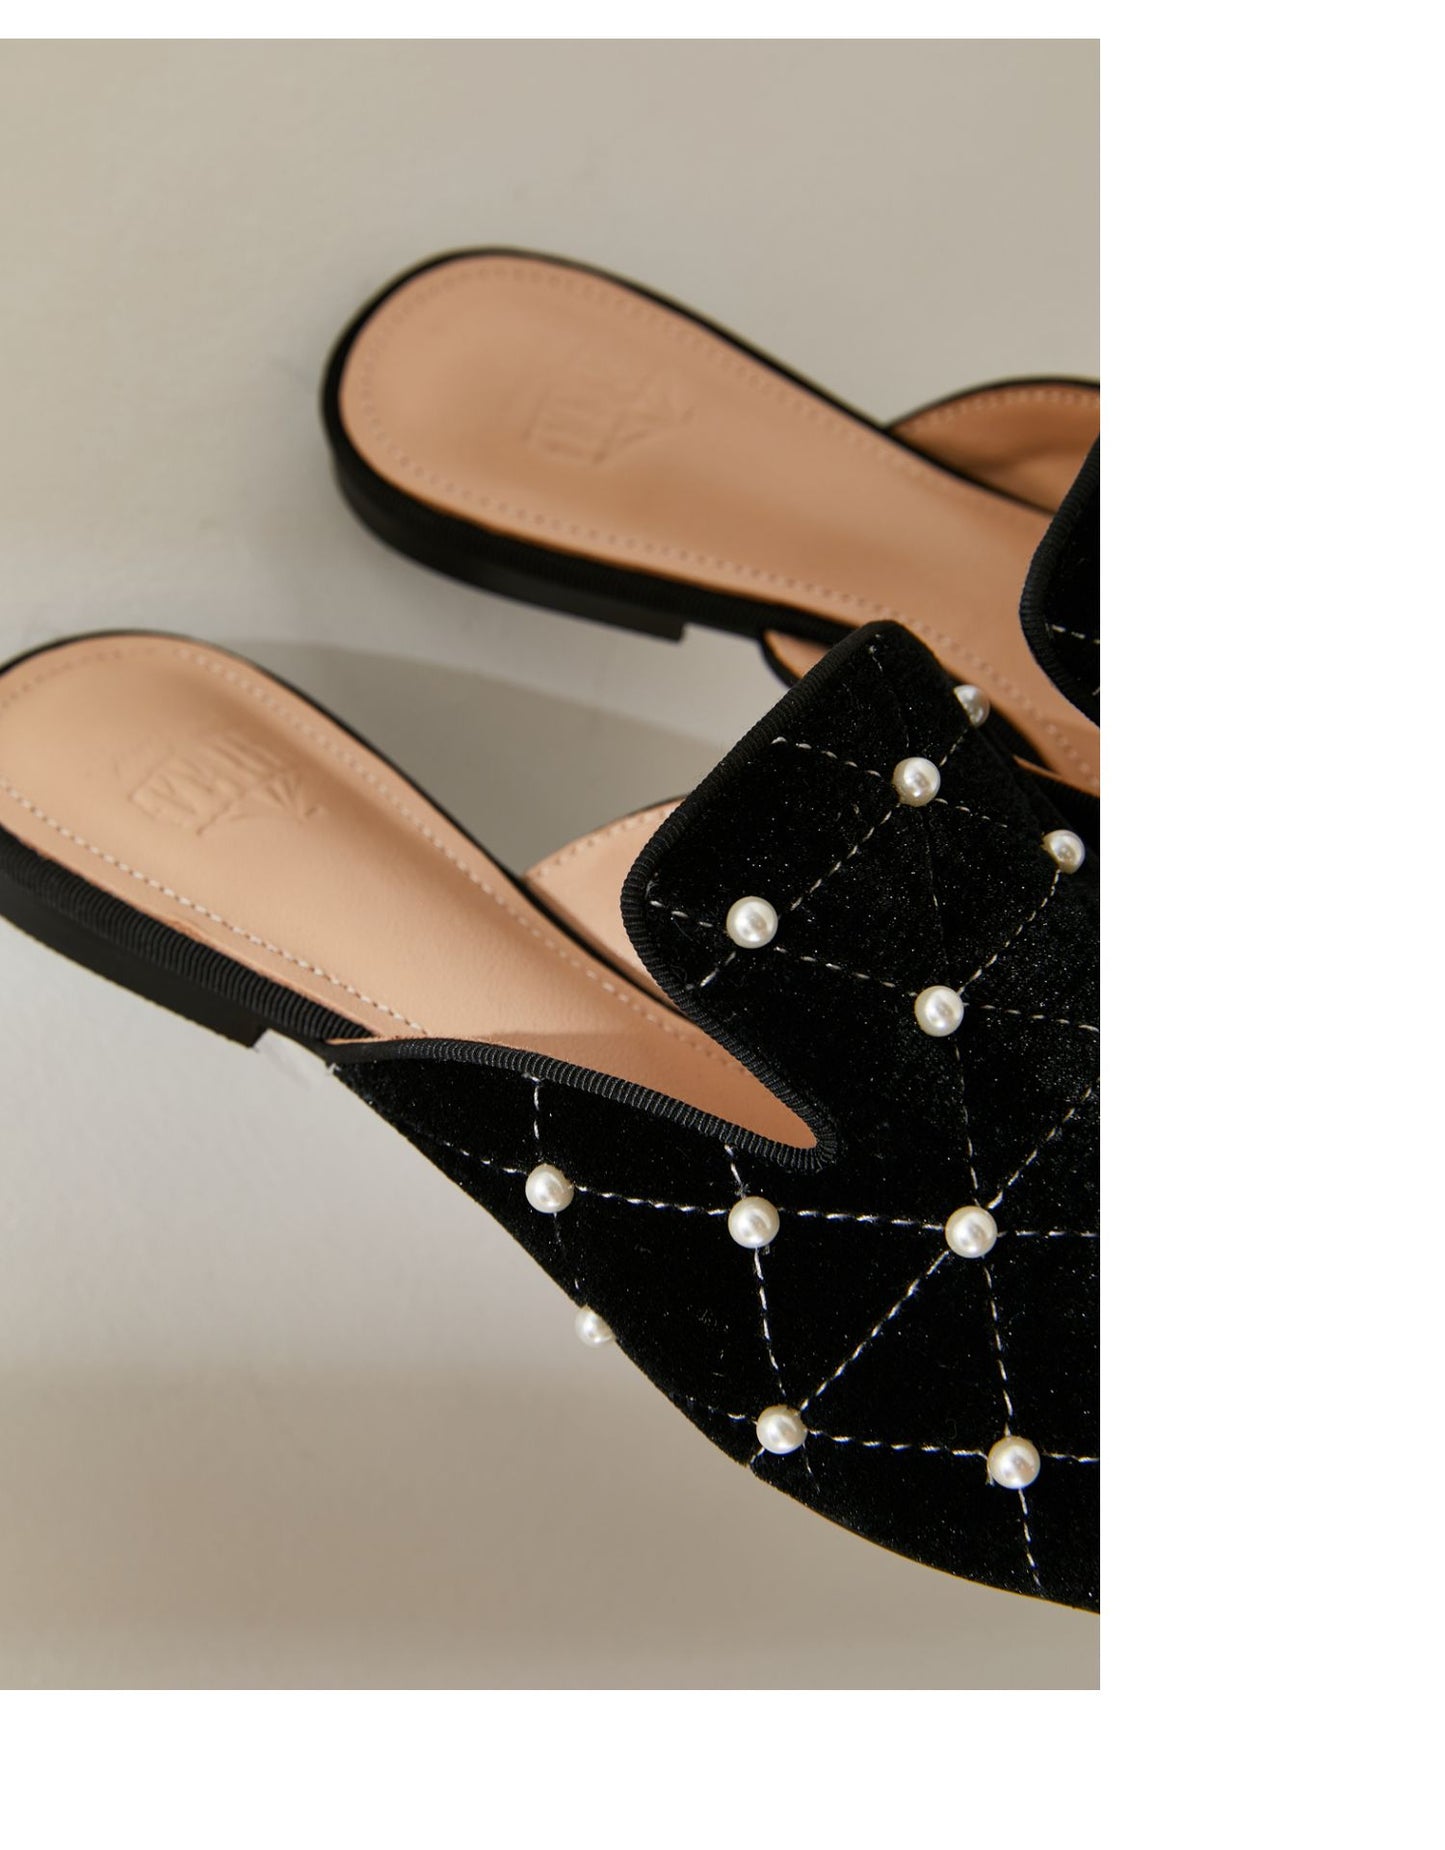 BFEI  pearl mules flat shoes sandals - Remii